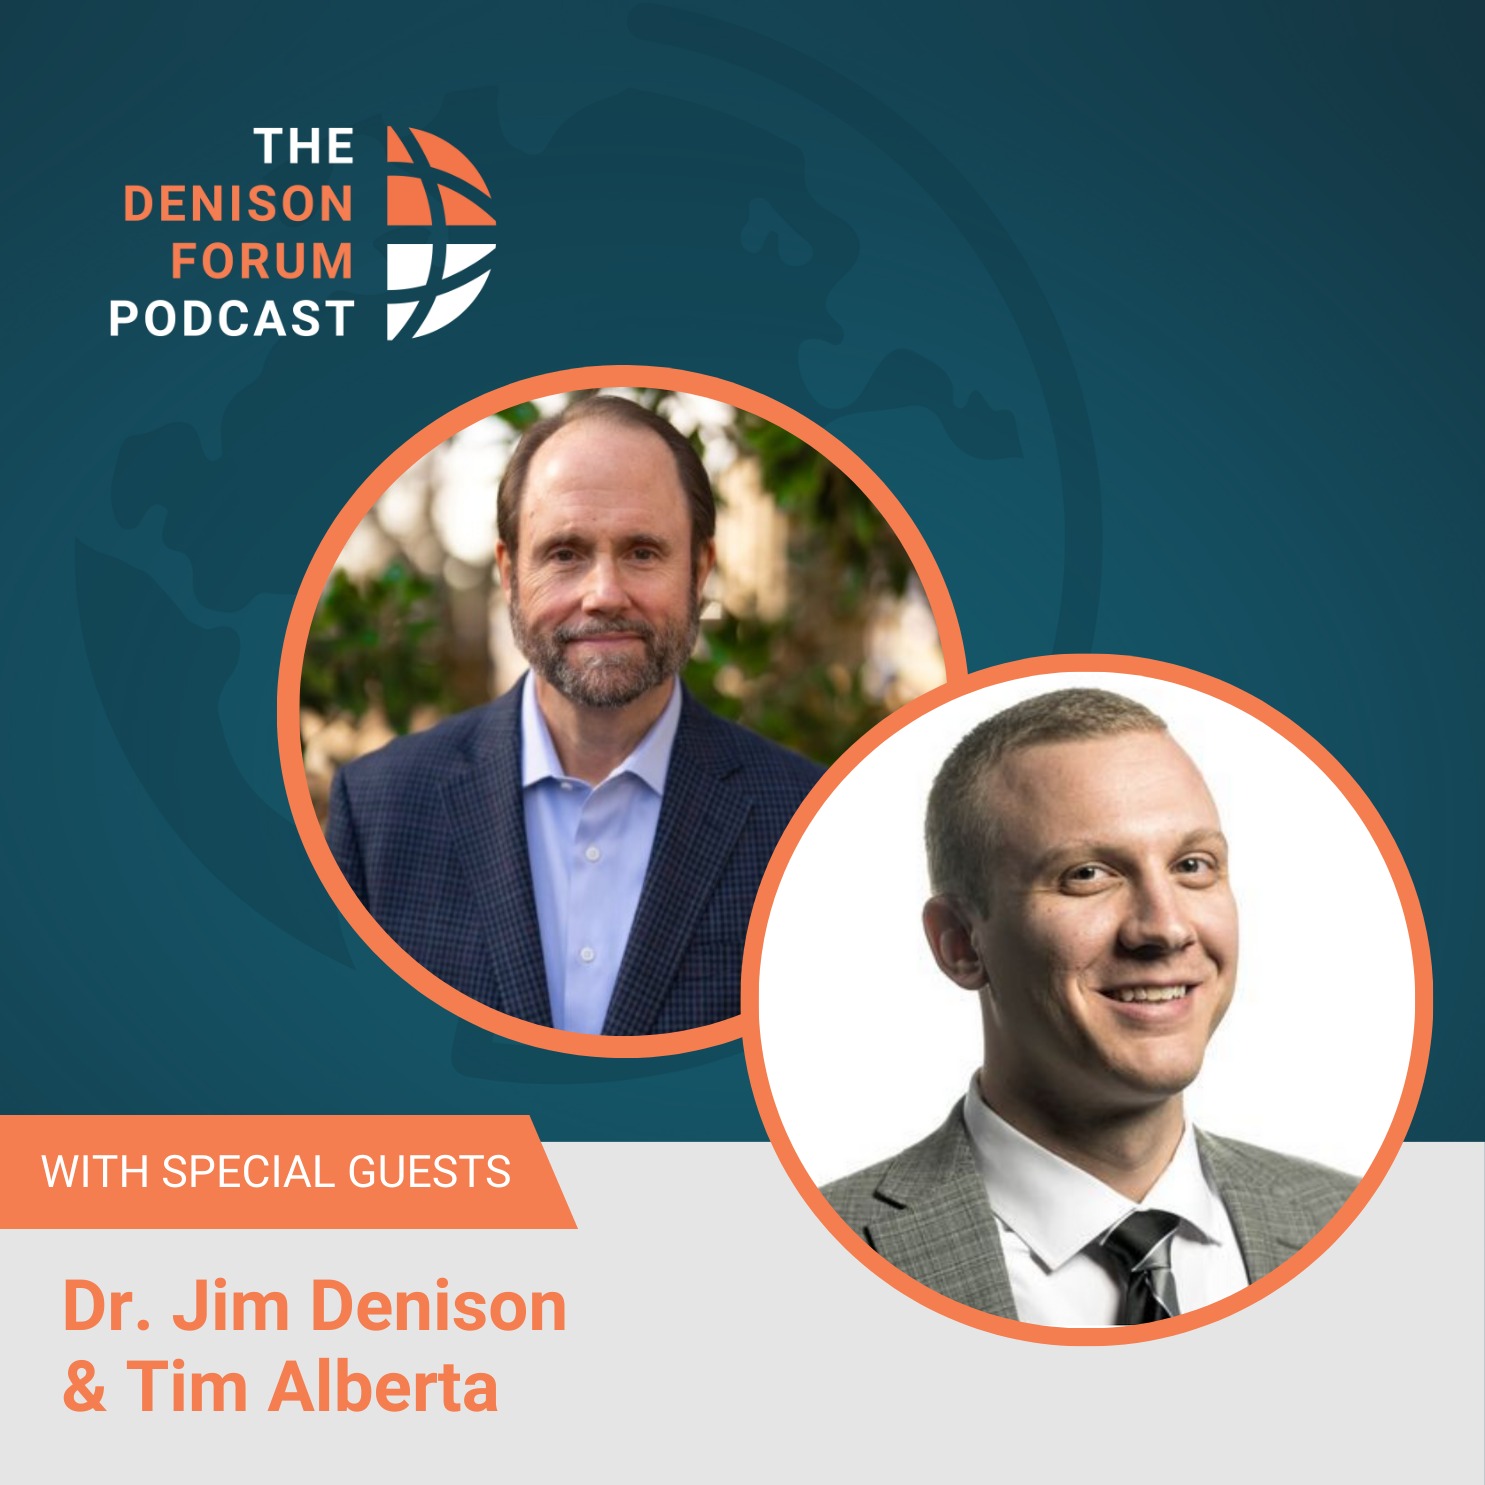 When politics get extreme, what should Christians do? A conversation with Tim Alberta